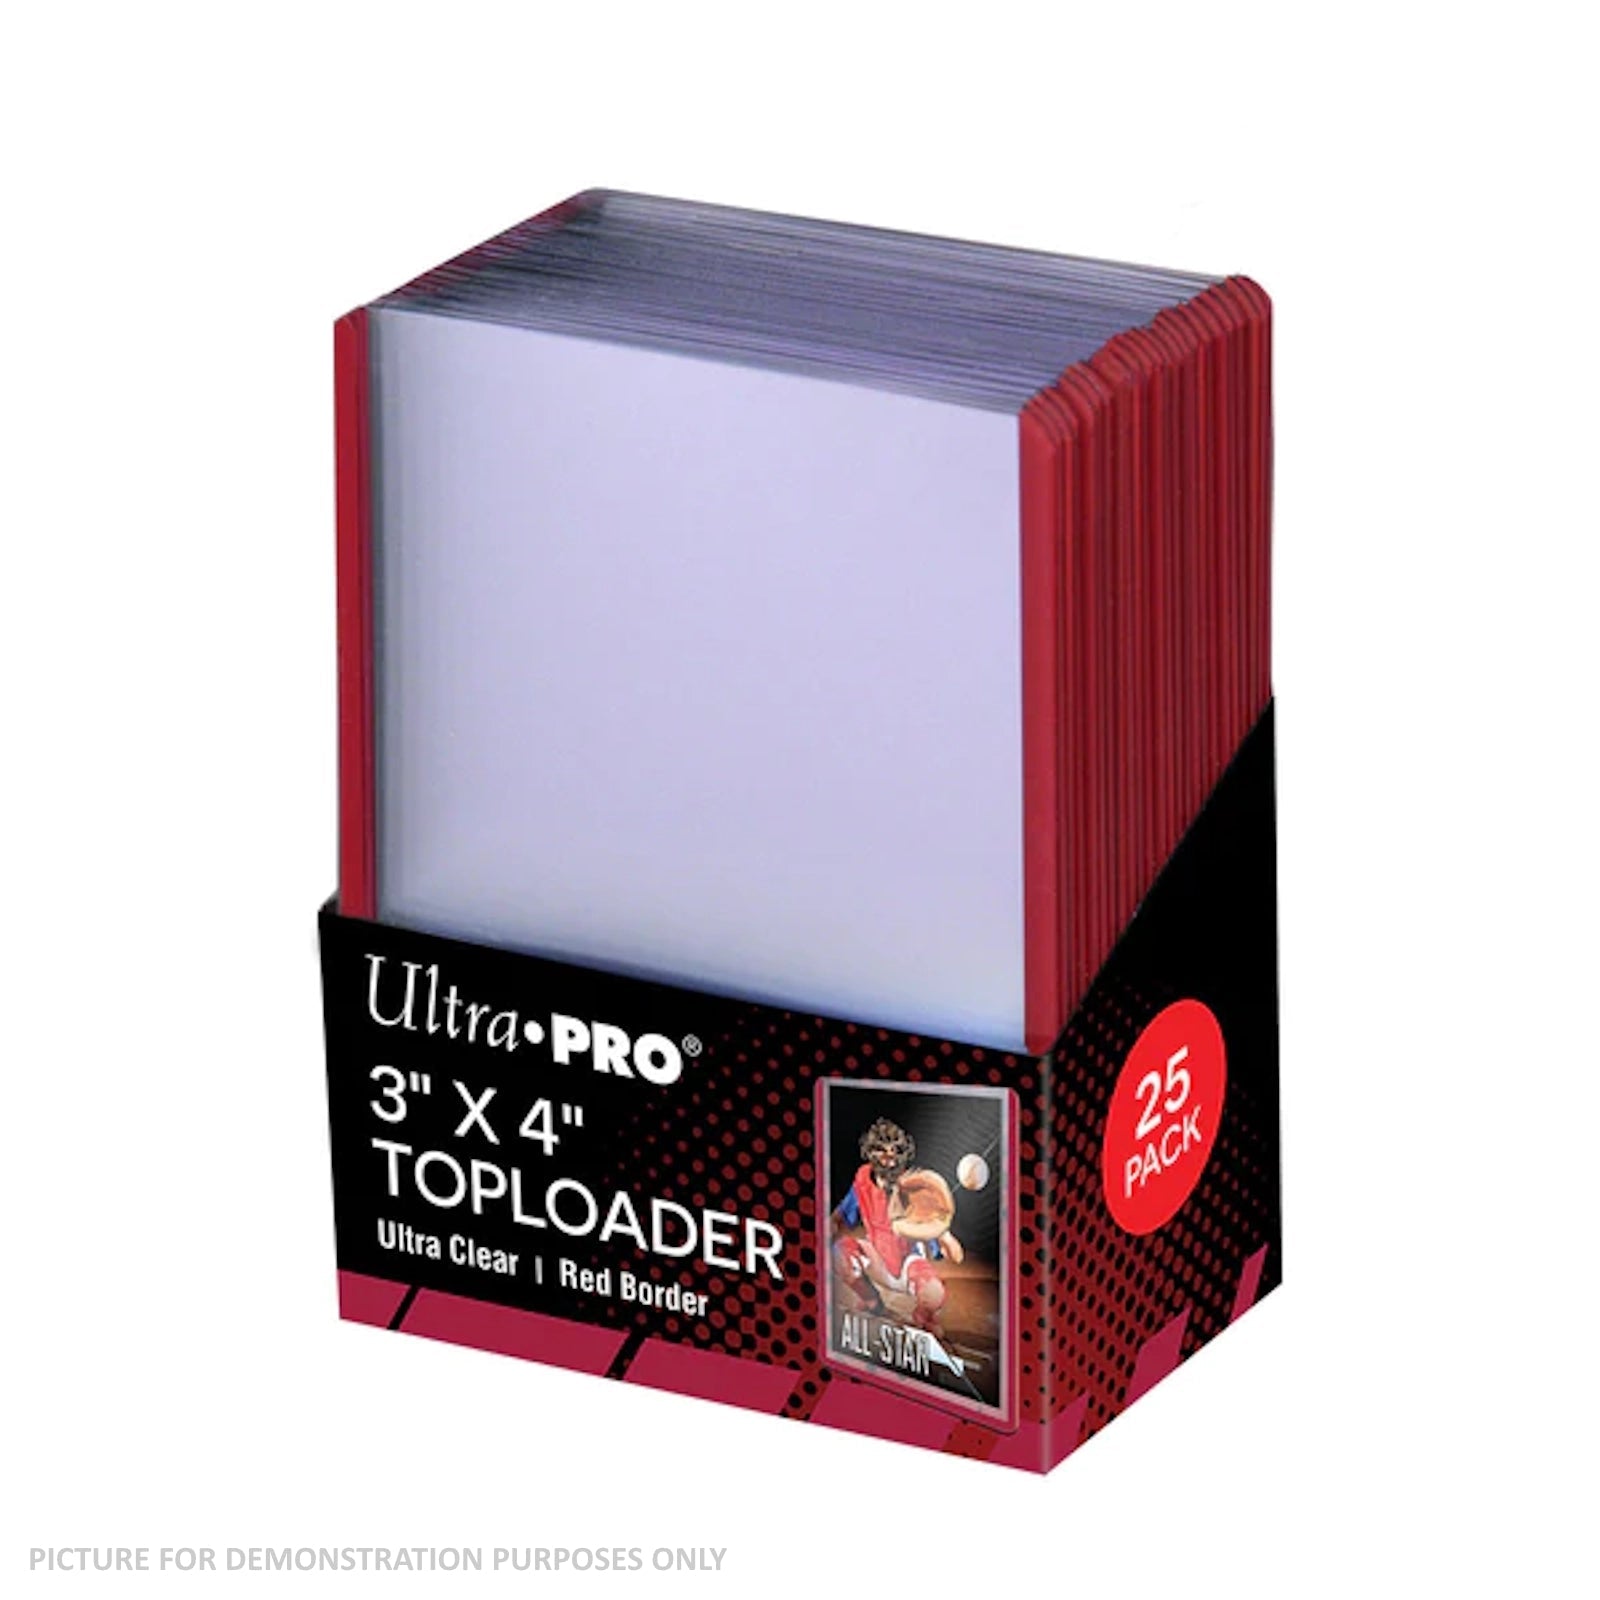 Ultra Pro RED Border Toploaders 3" X 4" - PACK OF 25